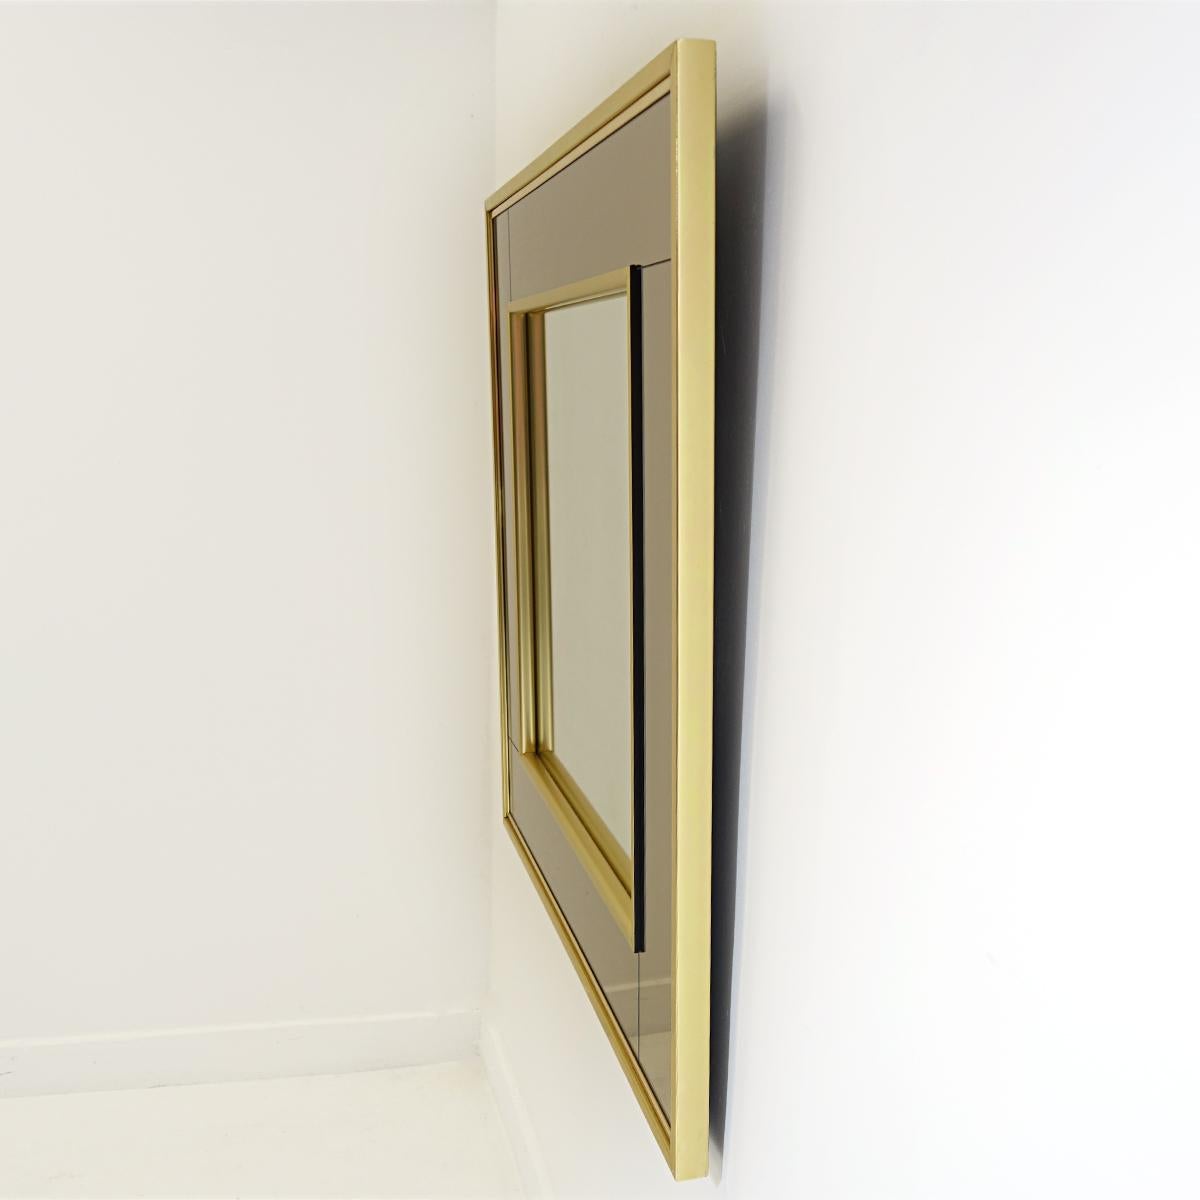 This square mirror has a center made of regular mirror glass which is framed by a champagne colored outside. All this framed in brass. A magical combination.